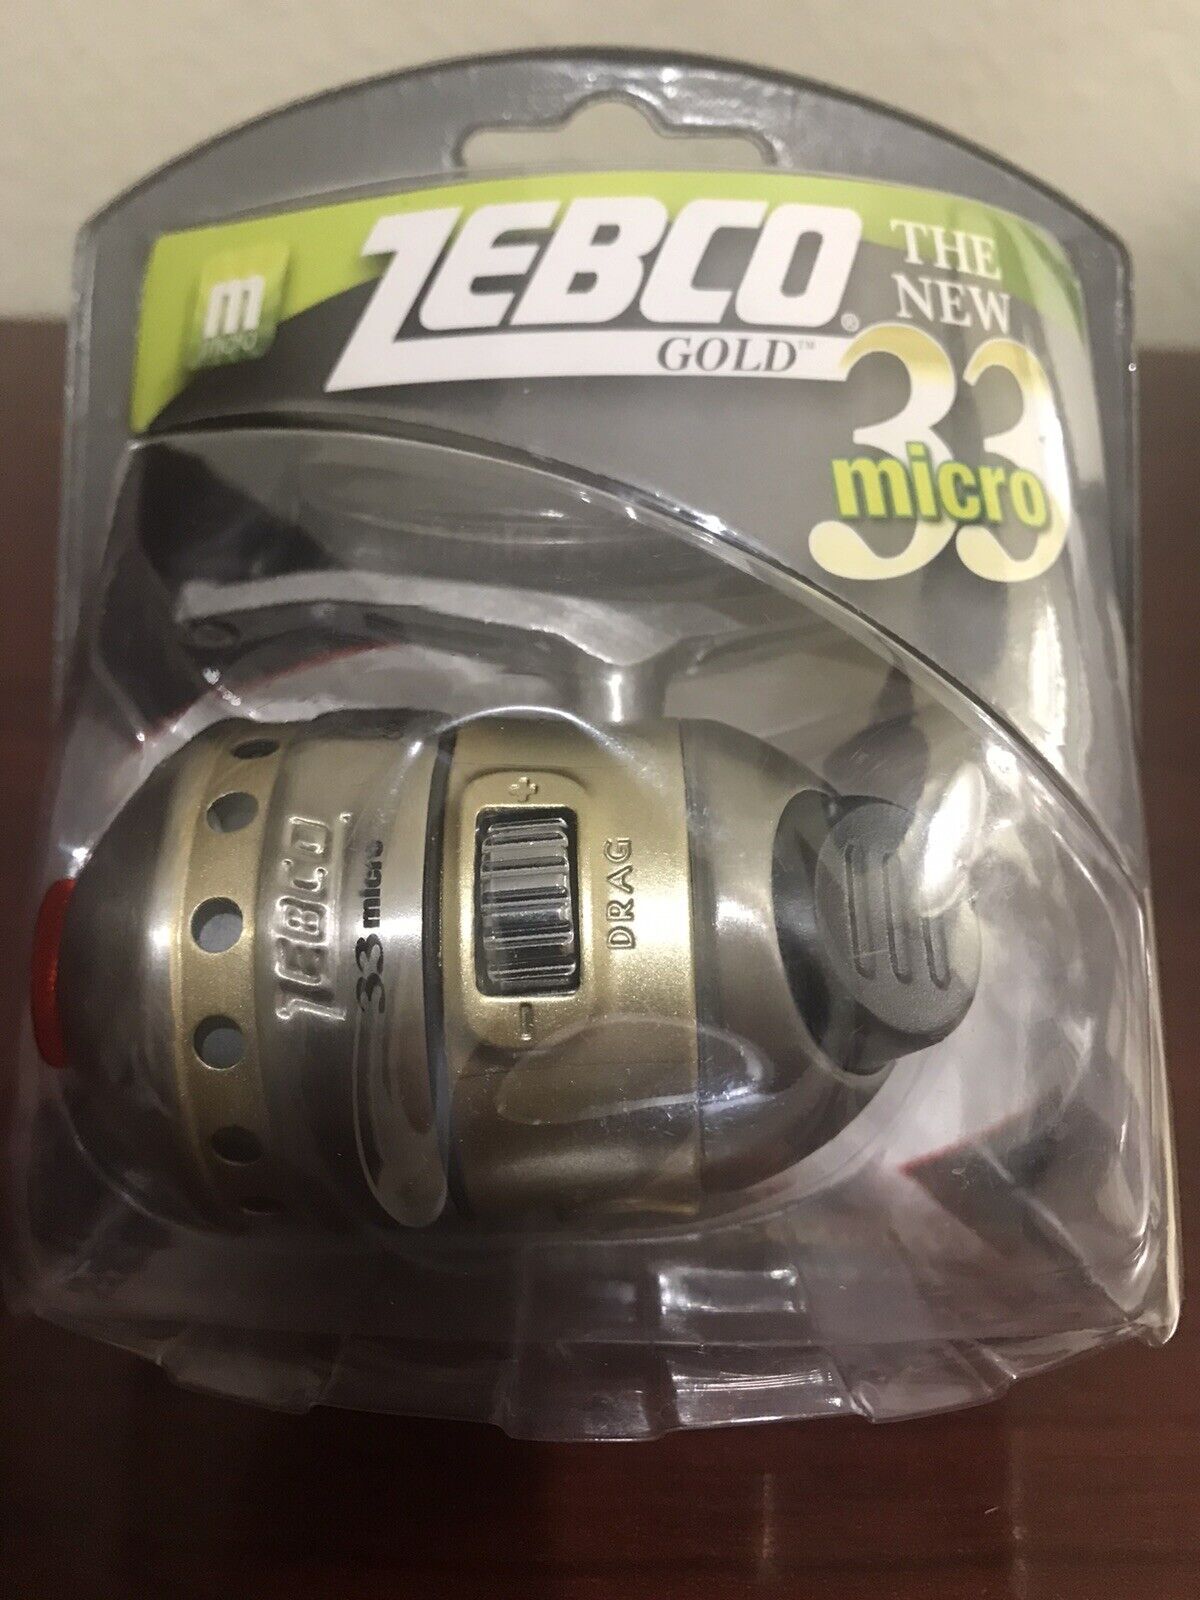 Zebco 33 Gold Micro Spincast Fishing Reel, Size 10 Reel, Silver/Gold 